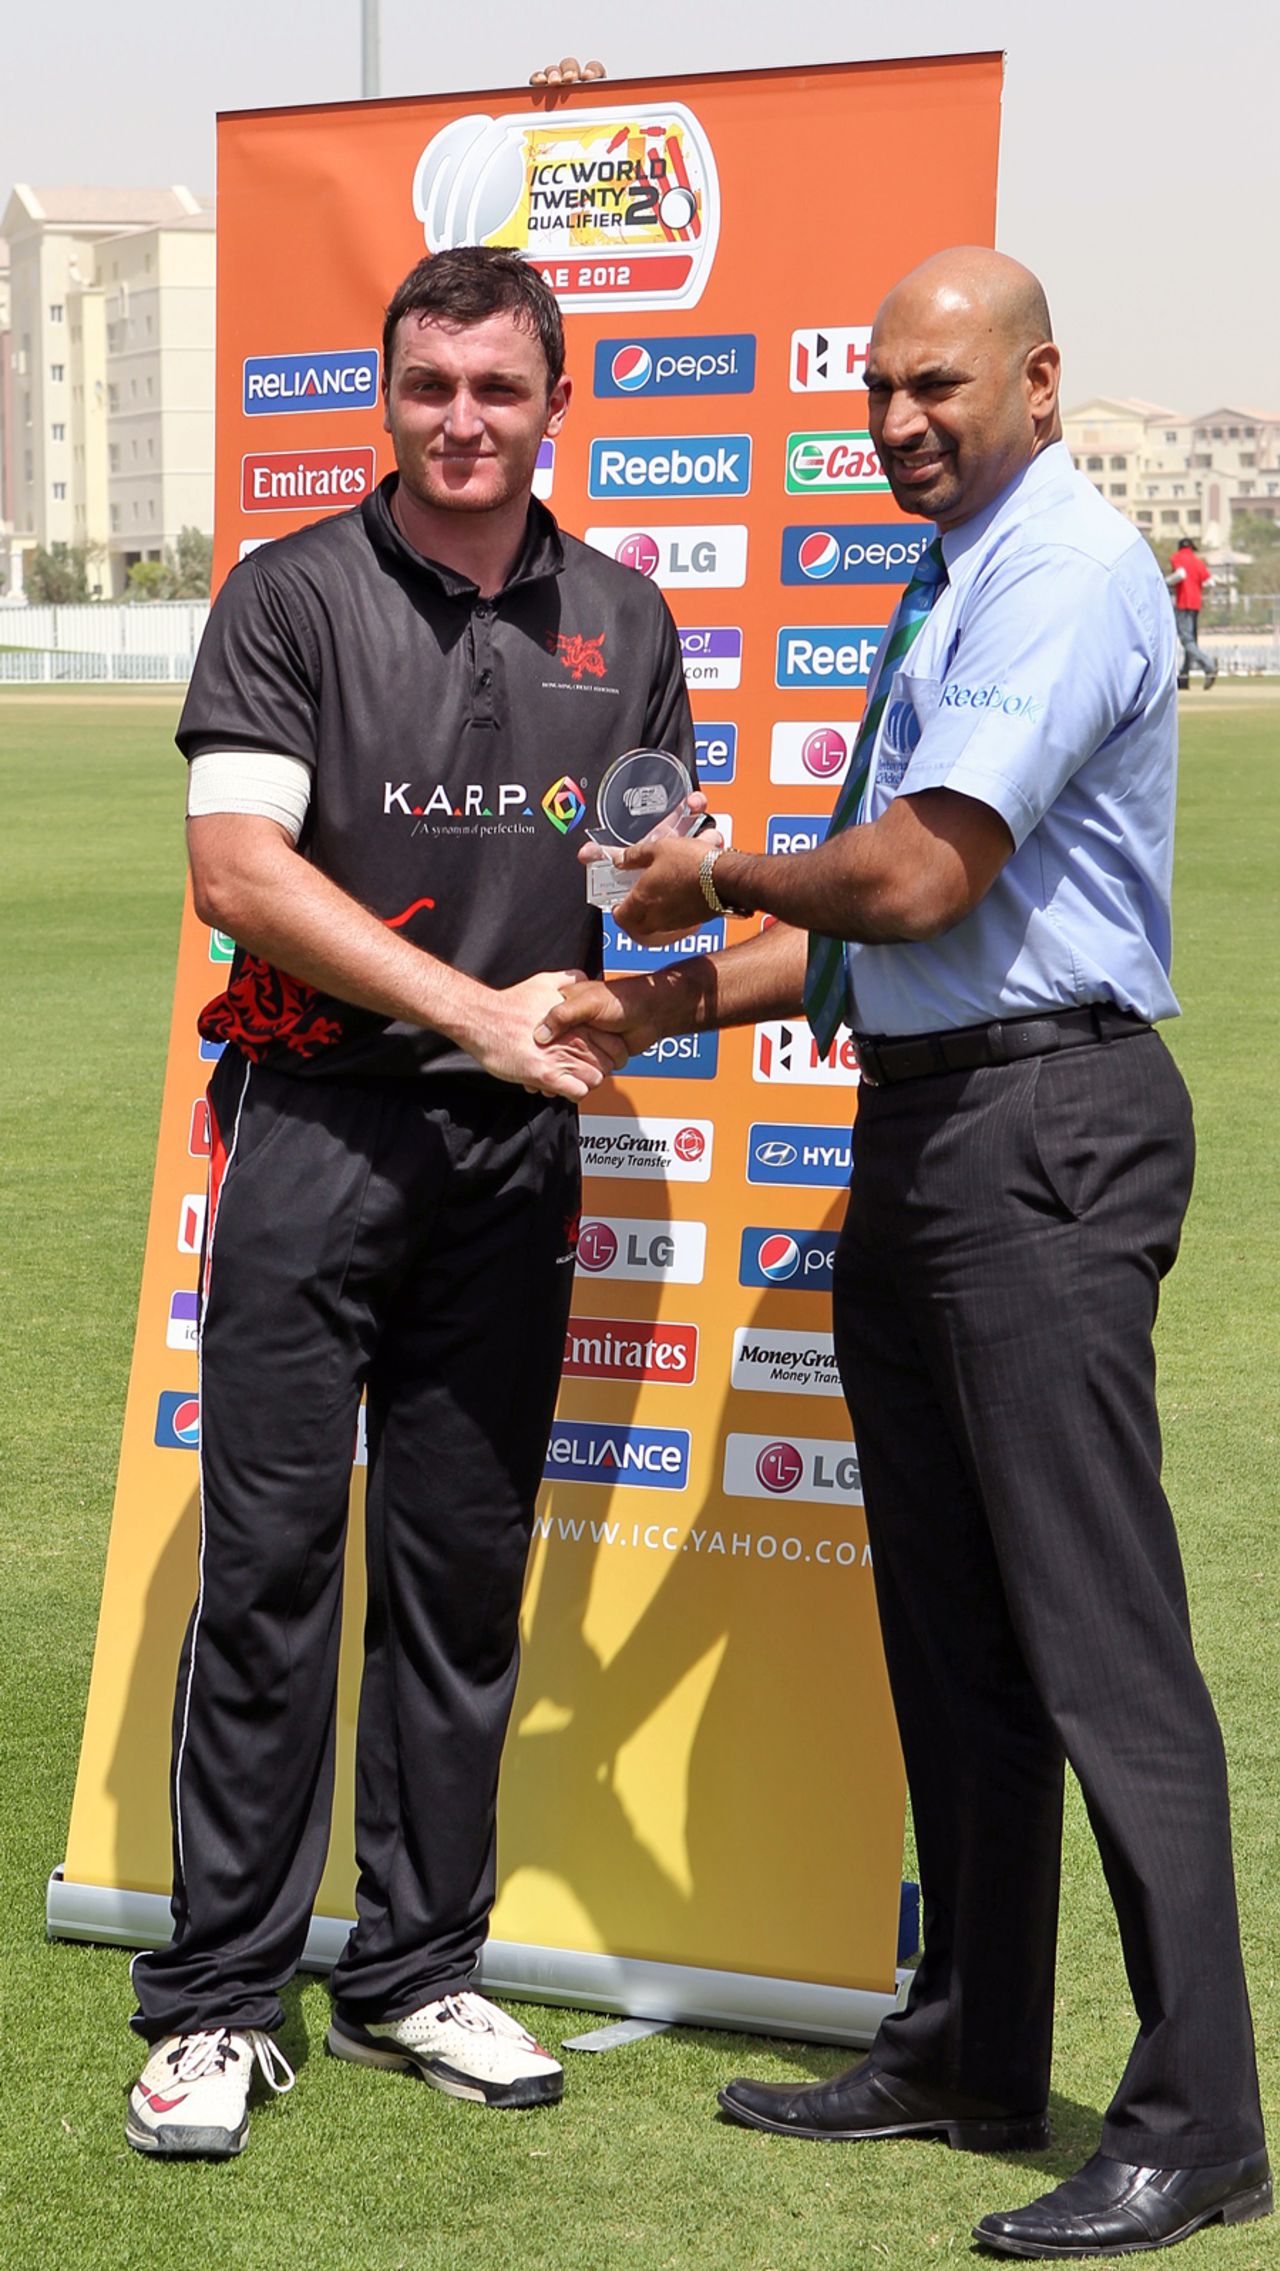 Jamie Atkinson receives his Man of the Match award from Tournament Official Graeme Labrooy after scoring 87* in the ICC World Twenty20 Qualifier match against Bermuda played at the ICC's GCA ground in Dubai on 14th March 2012